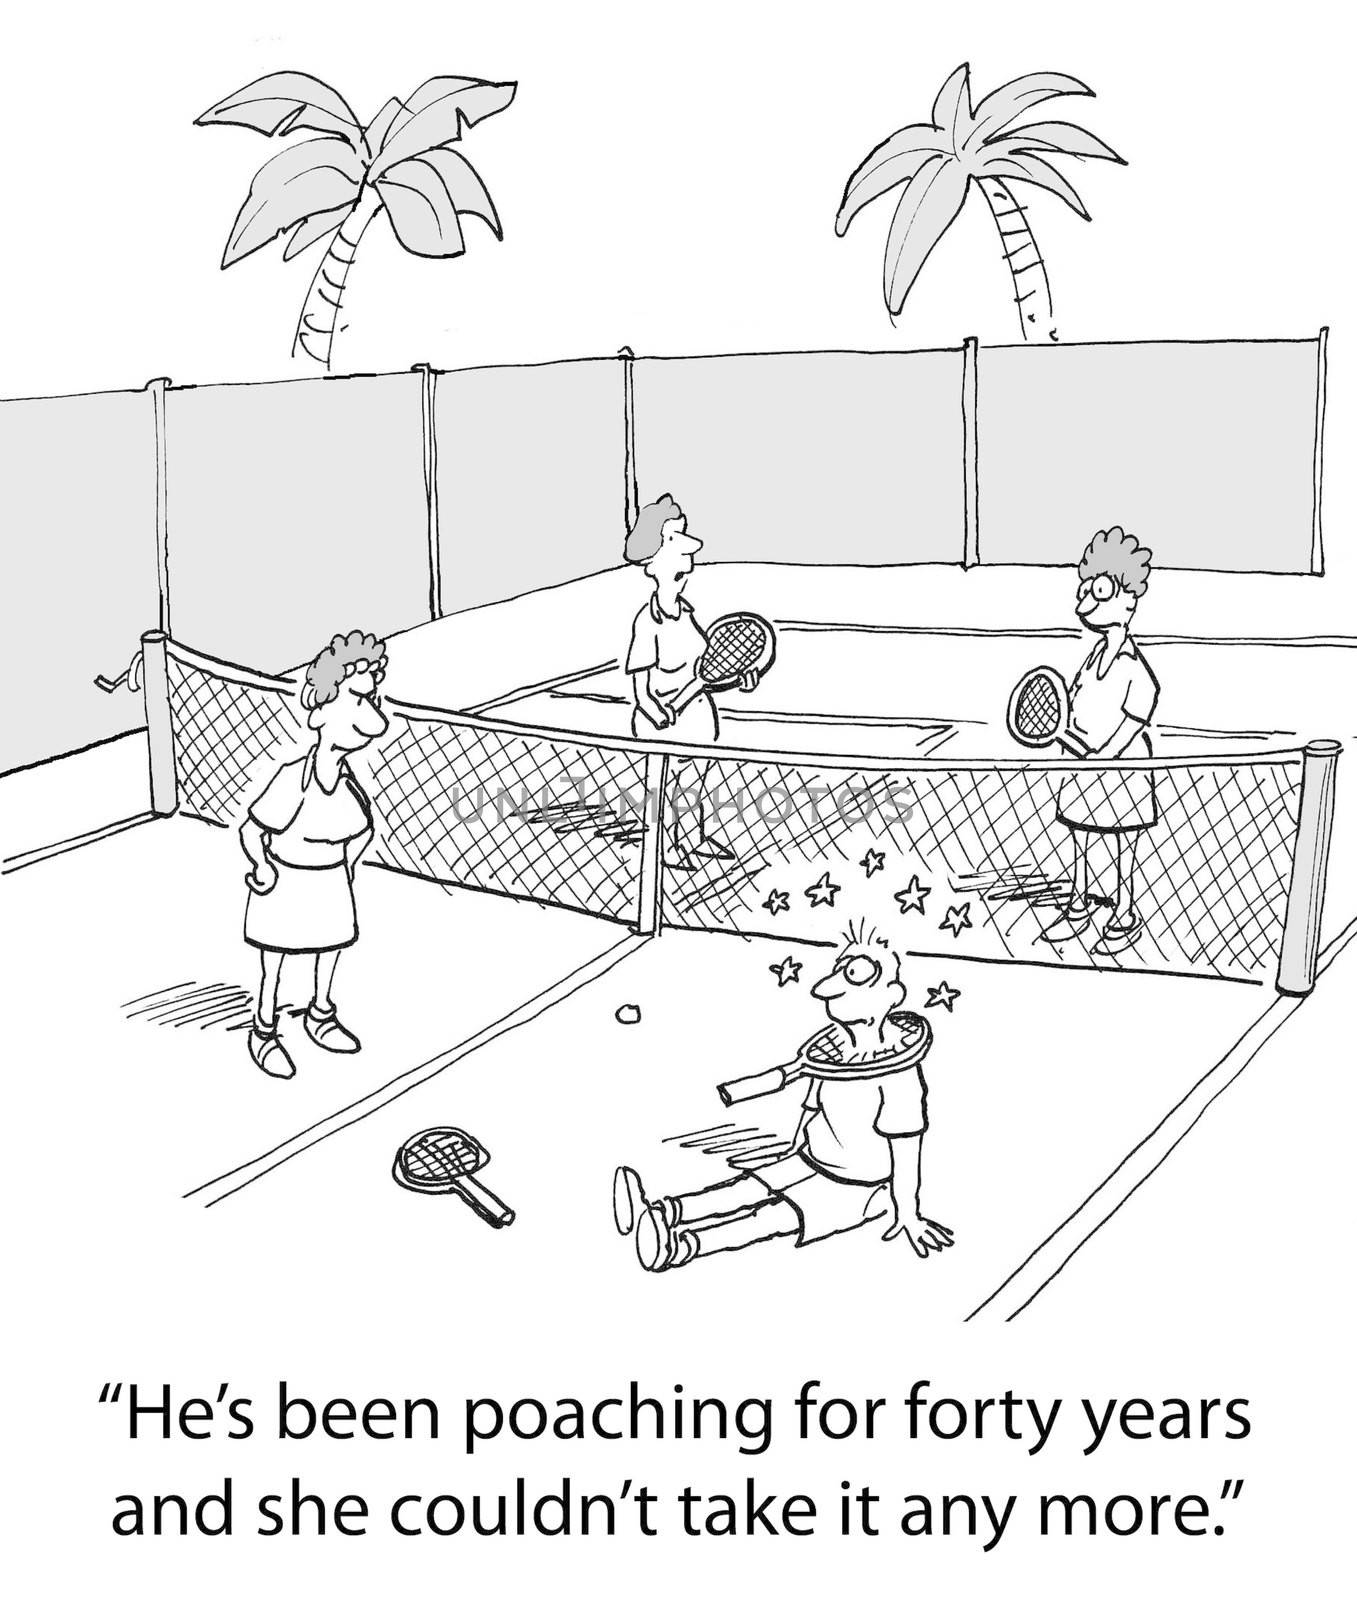 "He's been poaching for forty years and she could not take it any more."